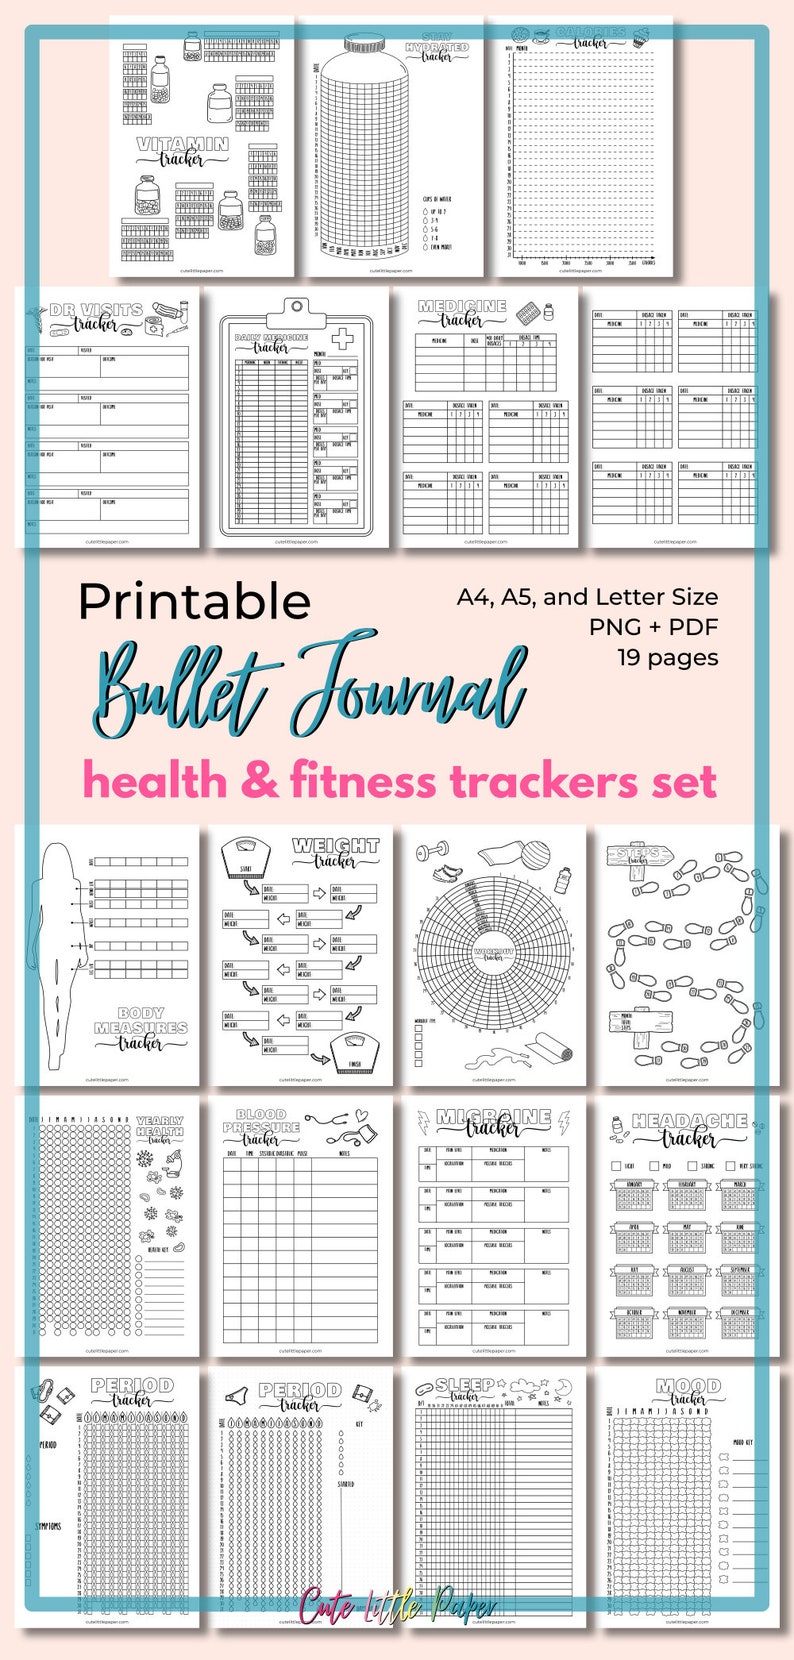 Bullet Journal Health & Fitness Trackers Set. 19 printable BuJo template pages: period, migraine, medication, weight loss, workout and MORE image 9